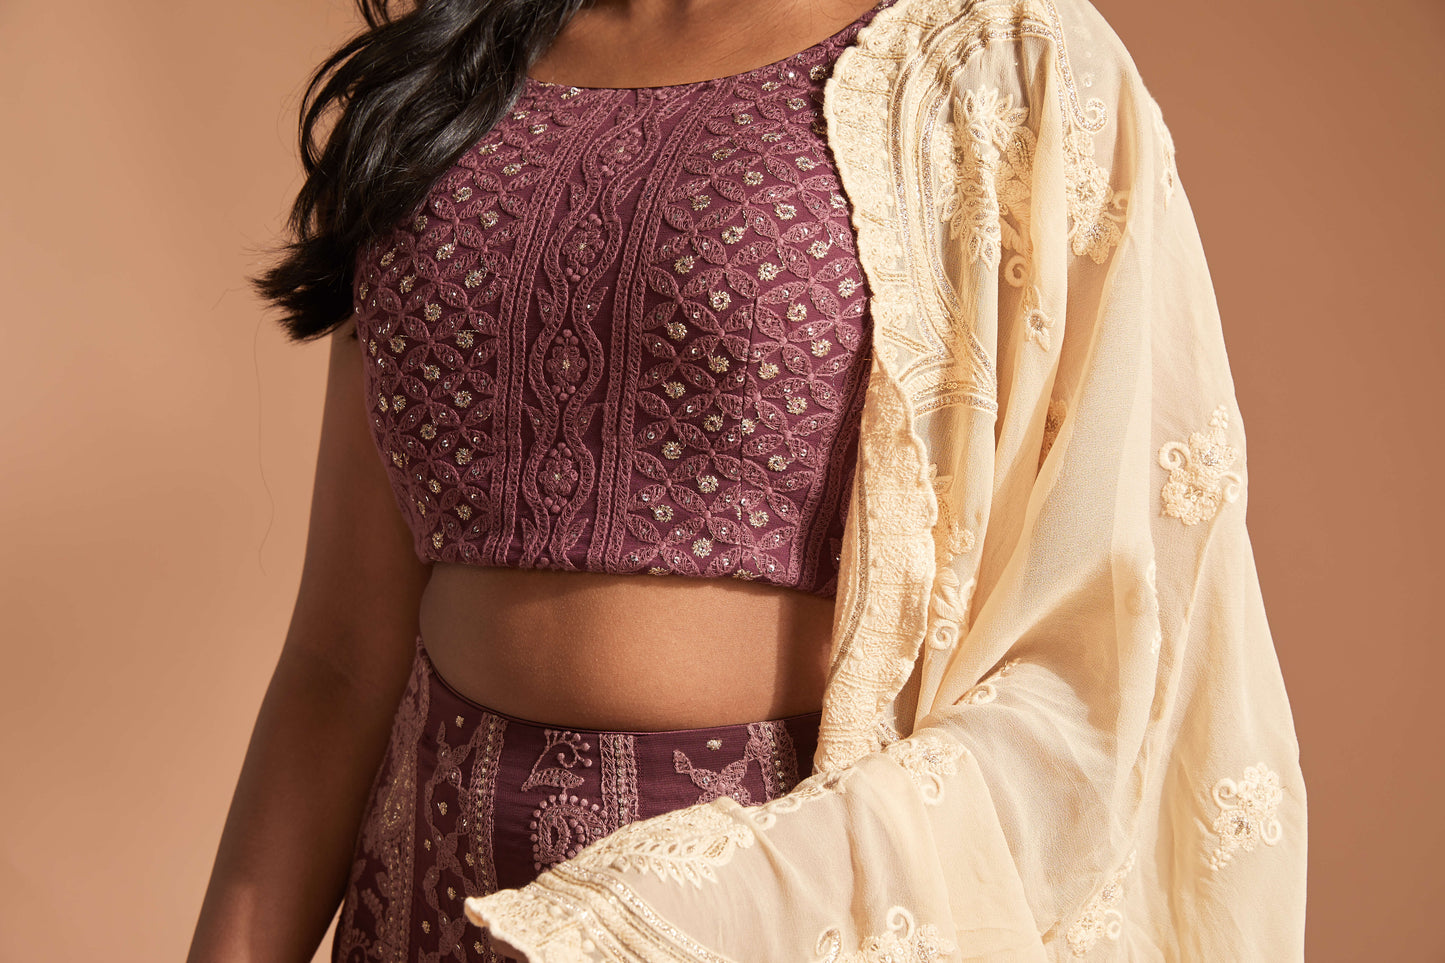 Burgundy lehenga made with lucknowi/chikankari work and featuring a cap sleeve blouse and cream scallop dupatta